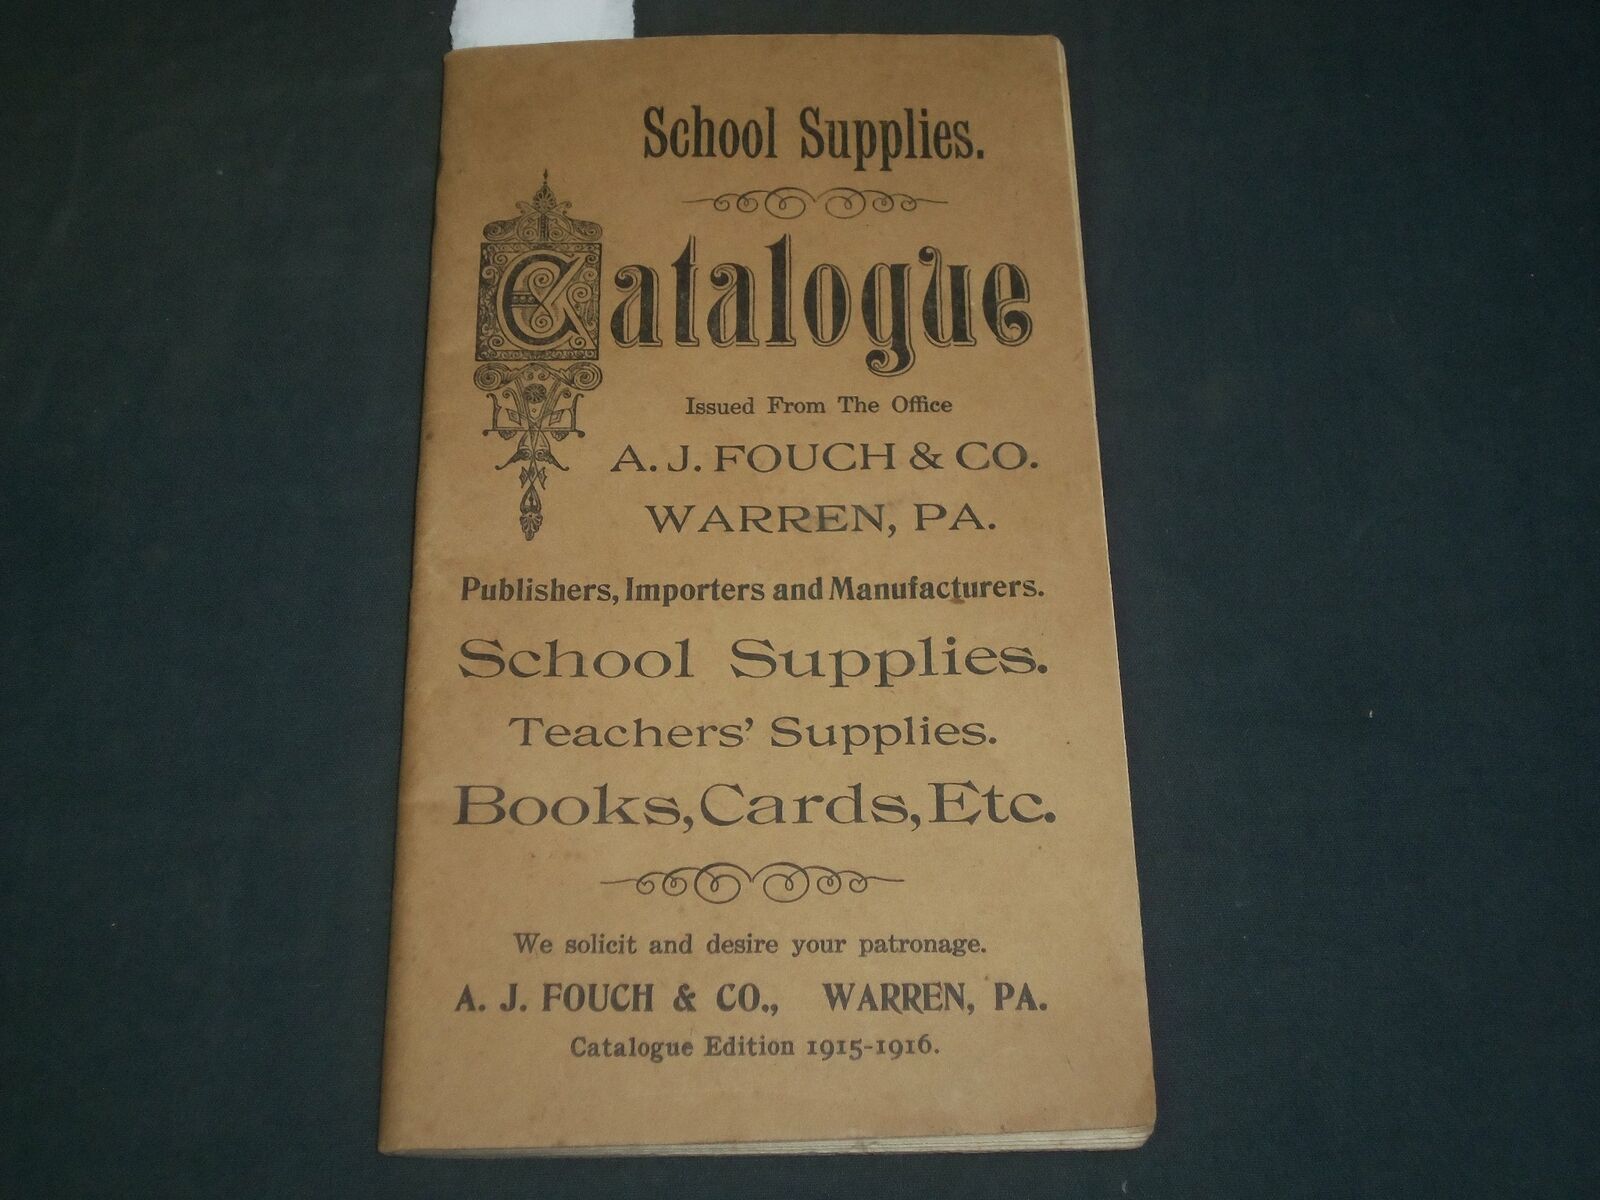 1915-1916 SCHOOL SUPPLIES CATALOGUE PUBLISHED BY A. J. FOUCH & CO. - J 5933